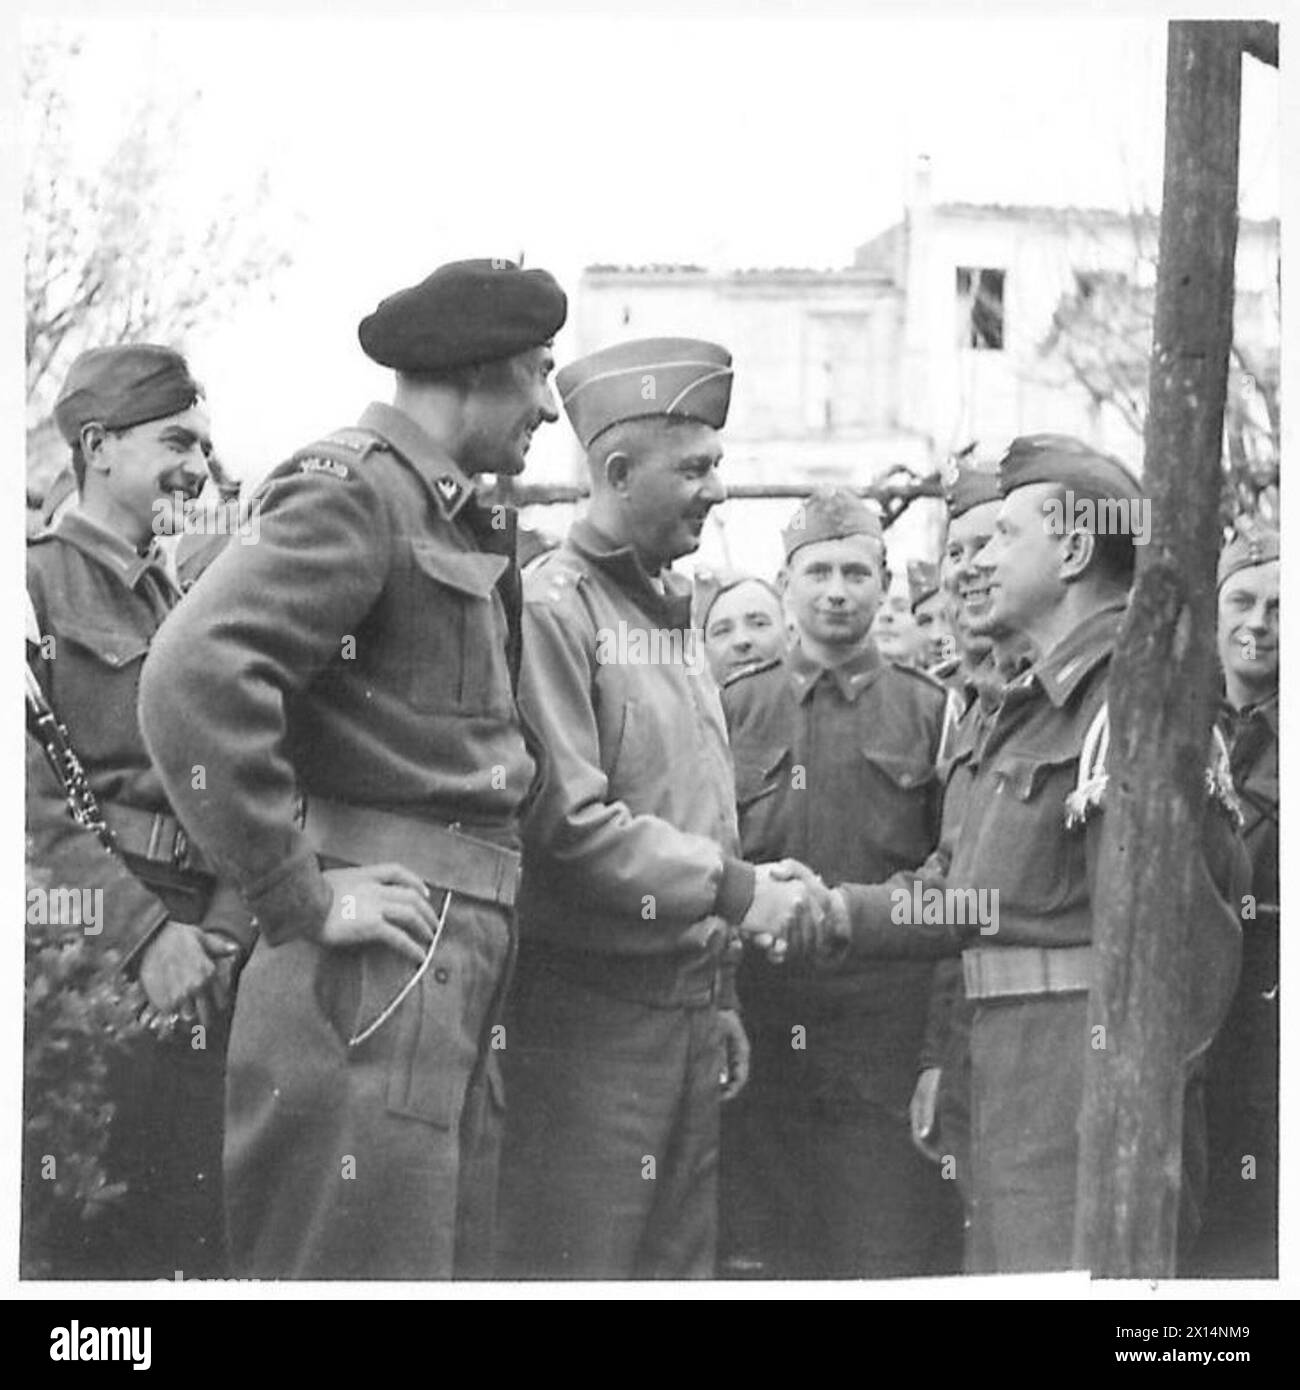 ALLIED ARMIES IN THE ITALIAN CAMPAIGN, 1943-1945 - General Jacob Devers, the Deputy Supreme Allied Commander of the Mediterranean Theatre, shaking hands with the 2nd Polish Corps military band during one of his frequent visit to various units of the Allied Forces. General Władysław Anders, the CO of the 2nd Corps, is on his right, smiling American Army, Polish Army, Polish Armed Forces in the West, Polish Corps, II, 8th Army, Devers, Jacob Loucks, Anders, Władysław Stock Photo